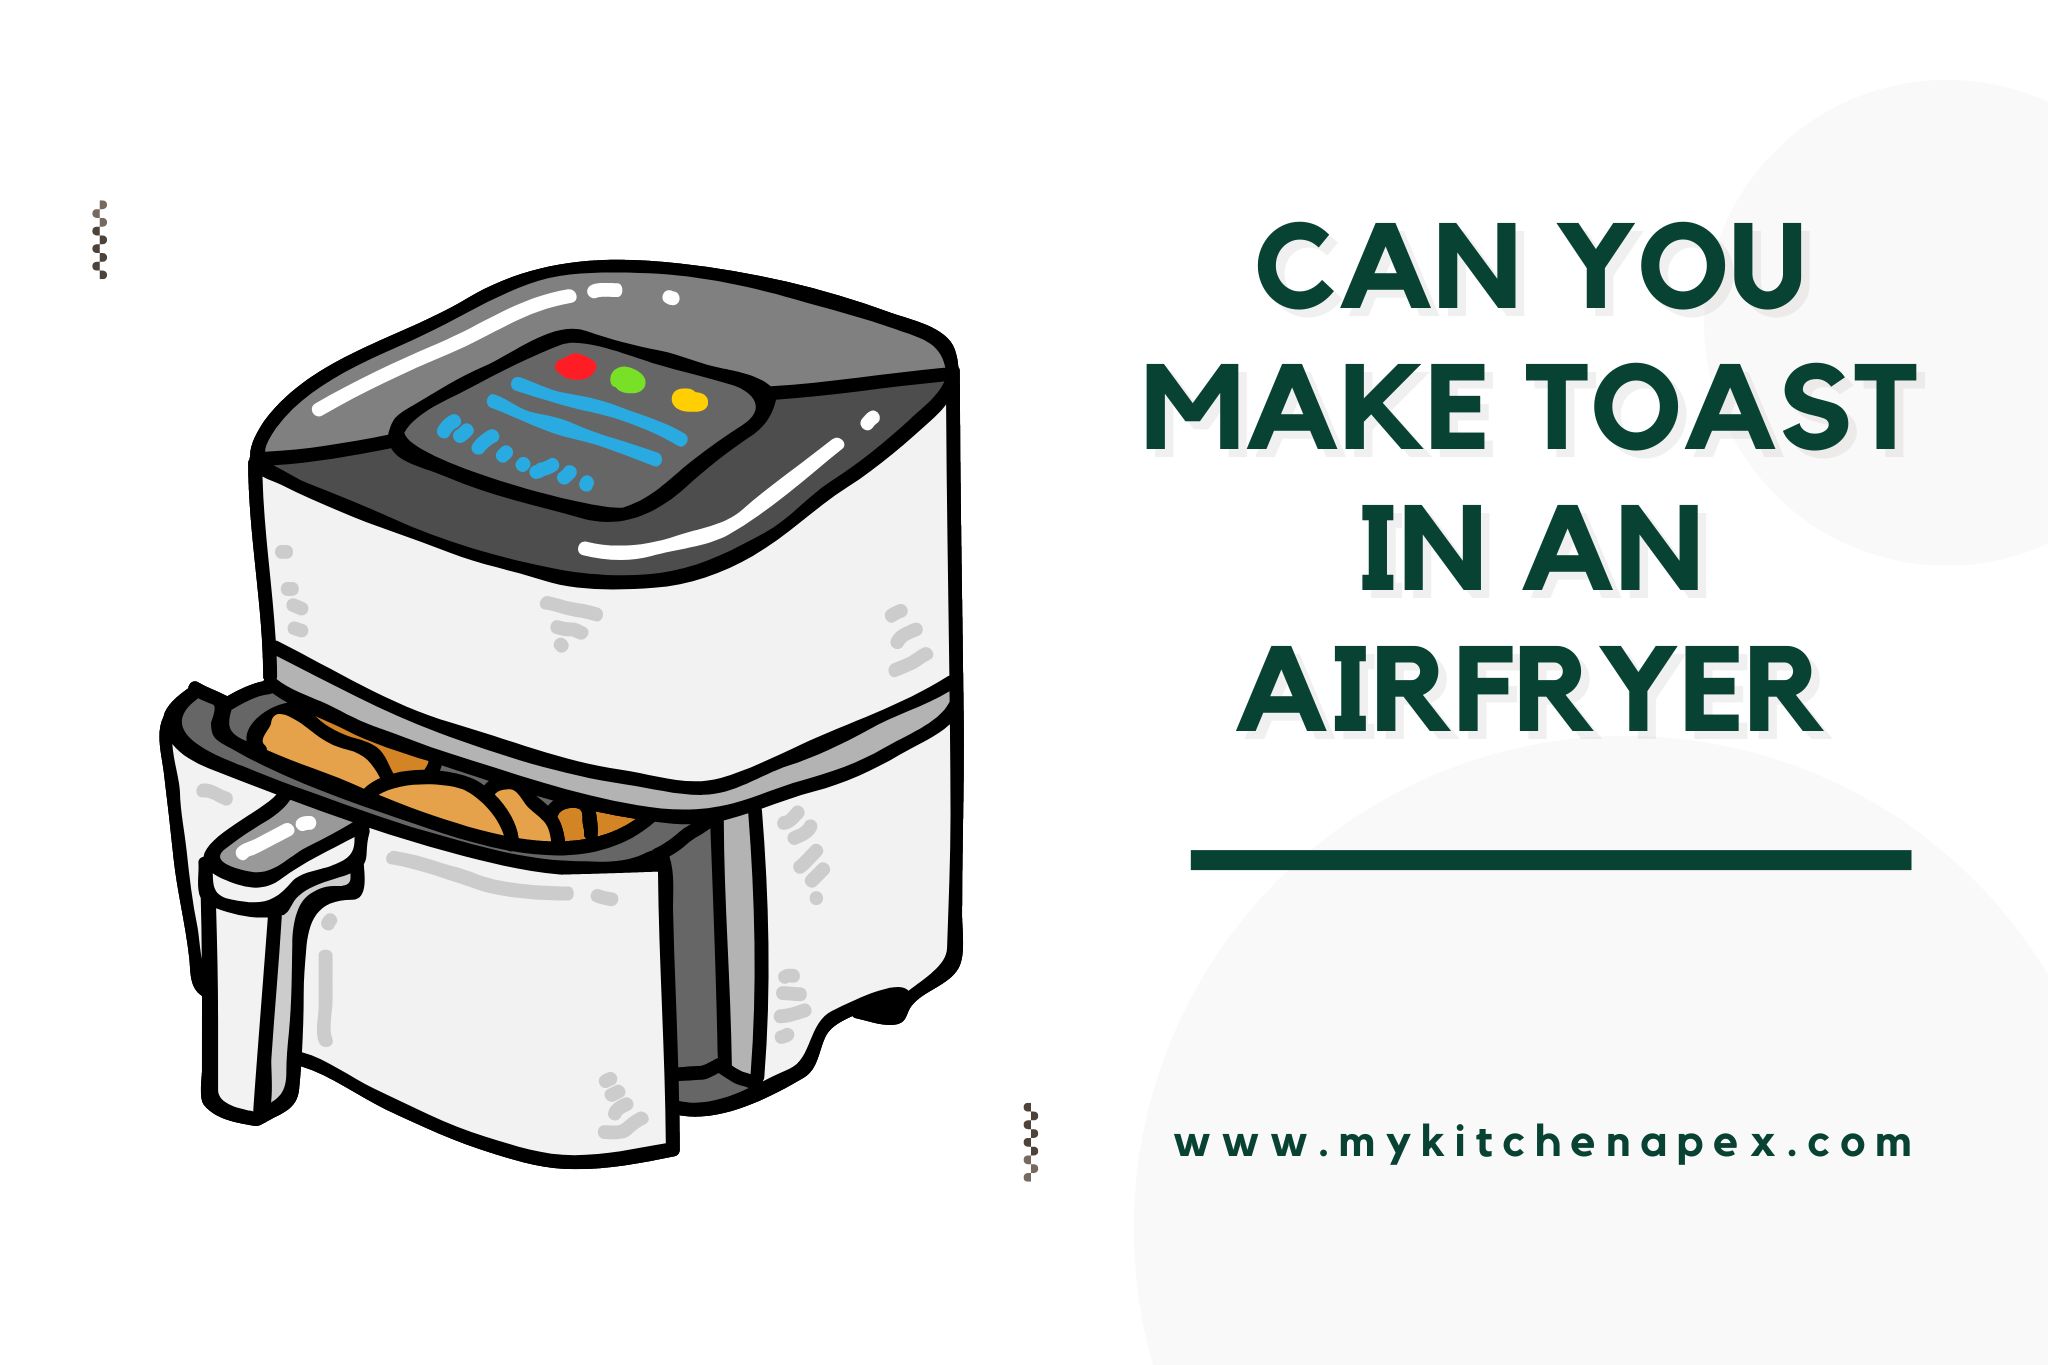 can you make toast in an airfryer